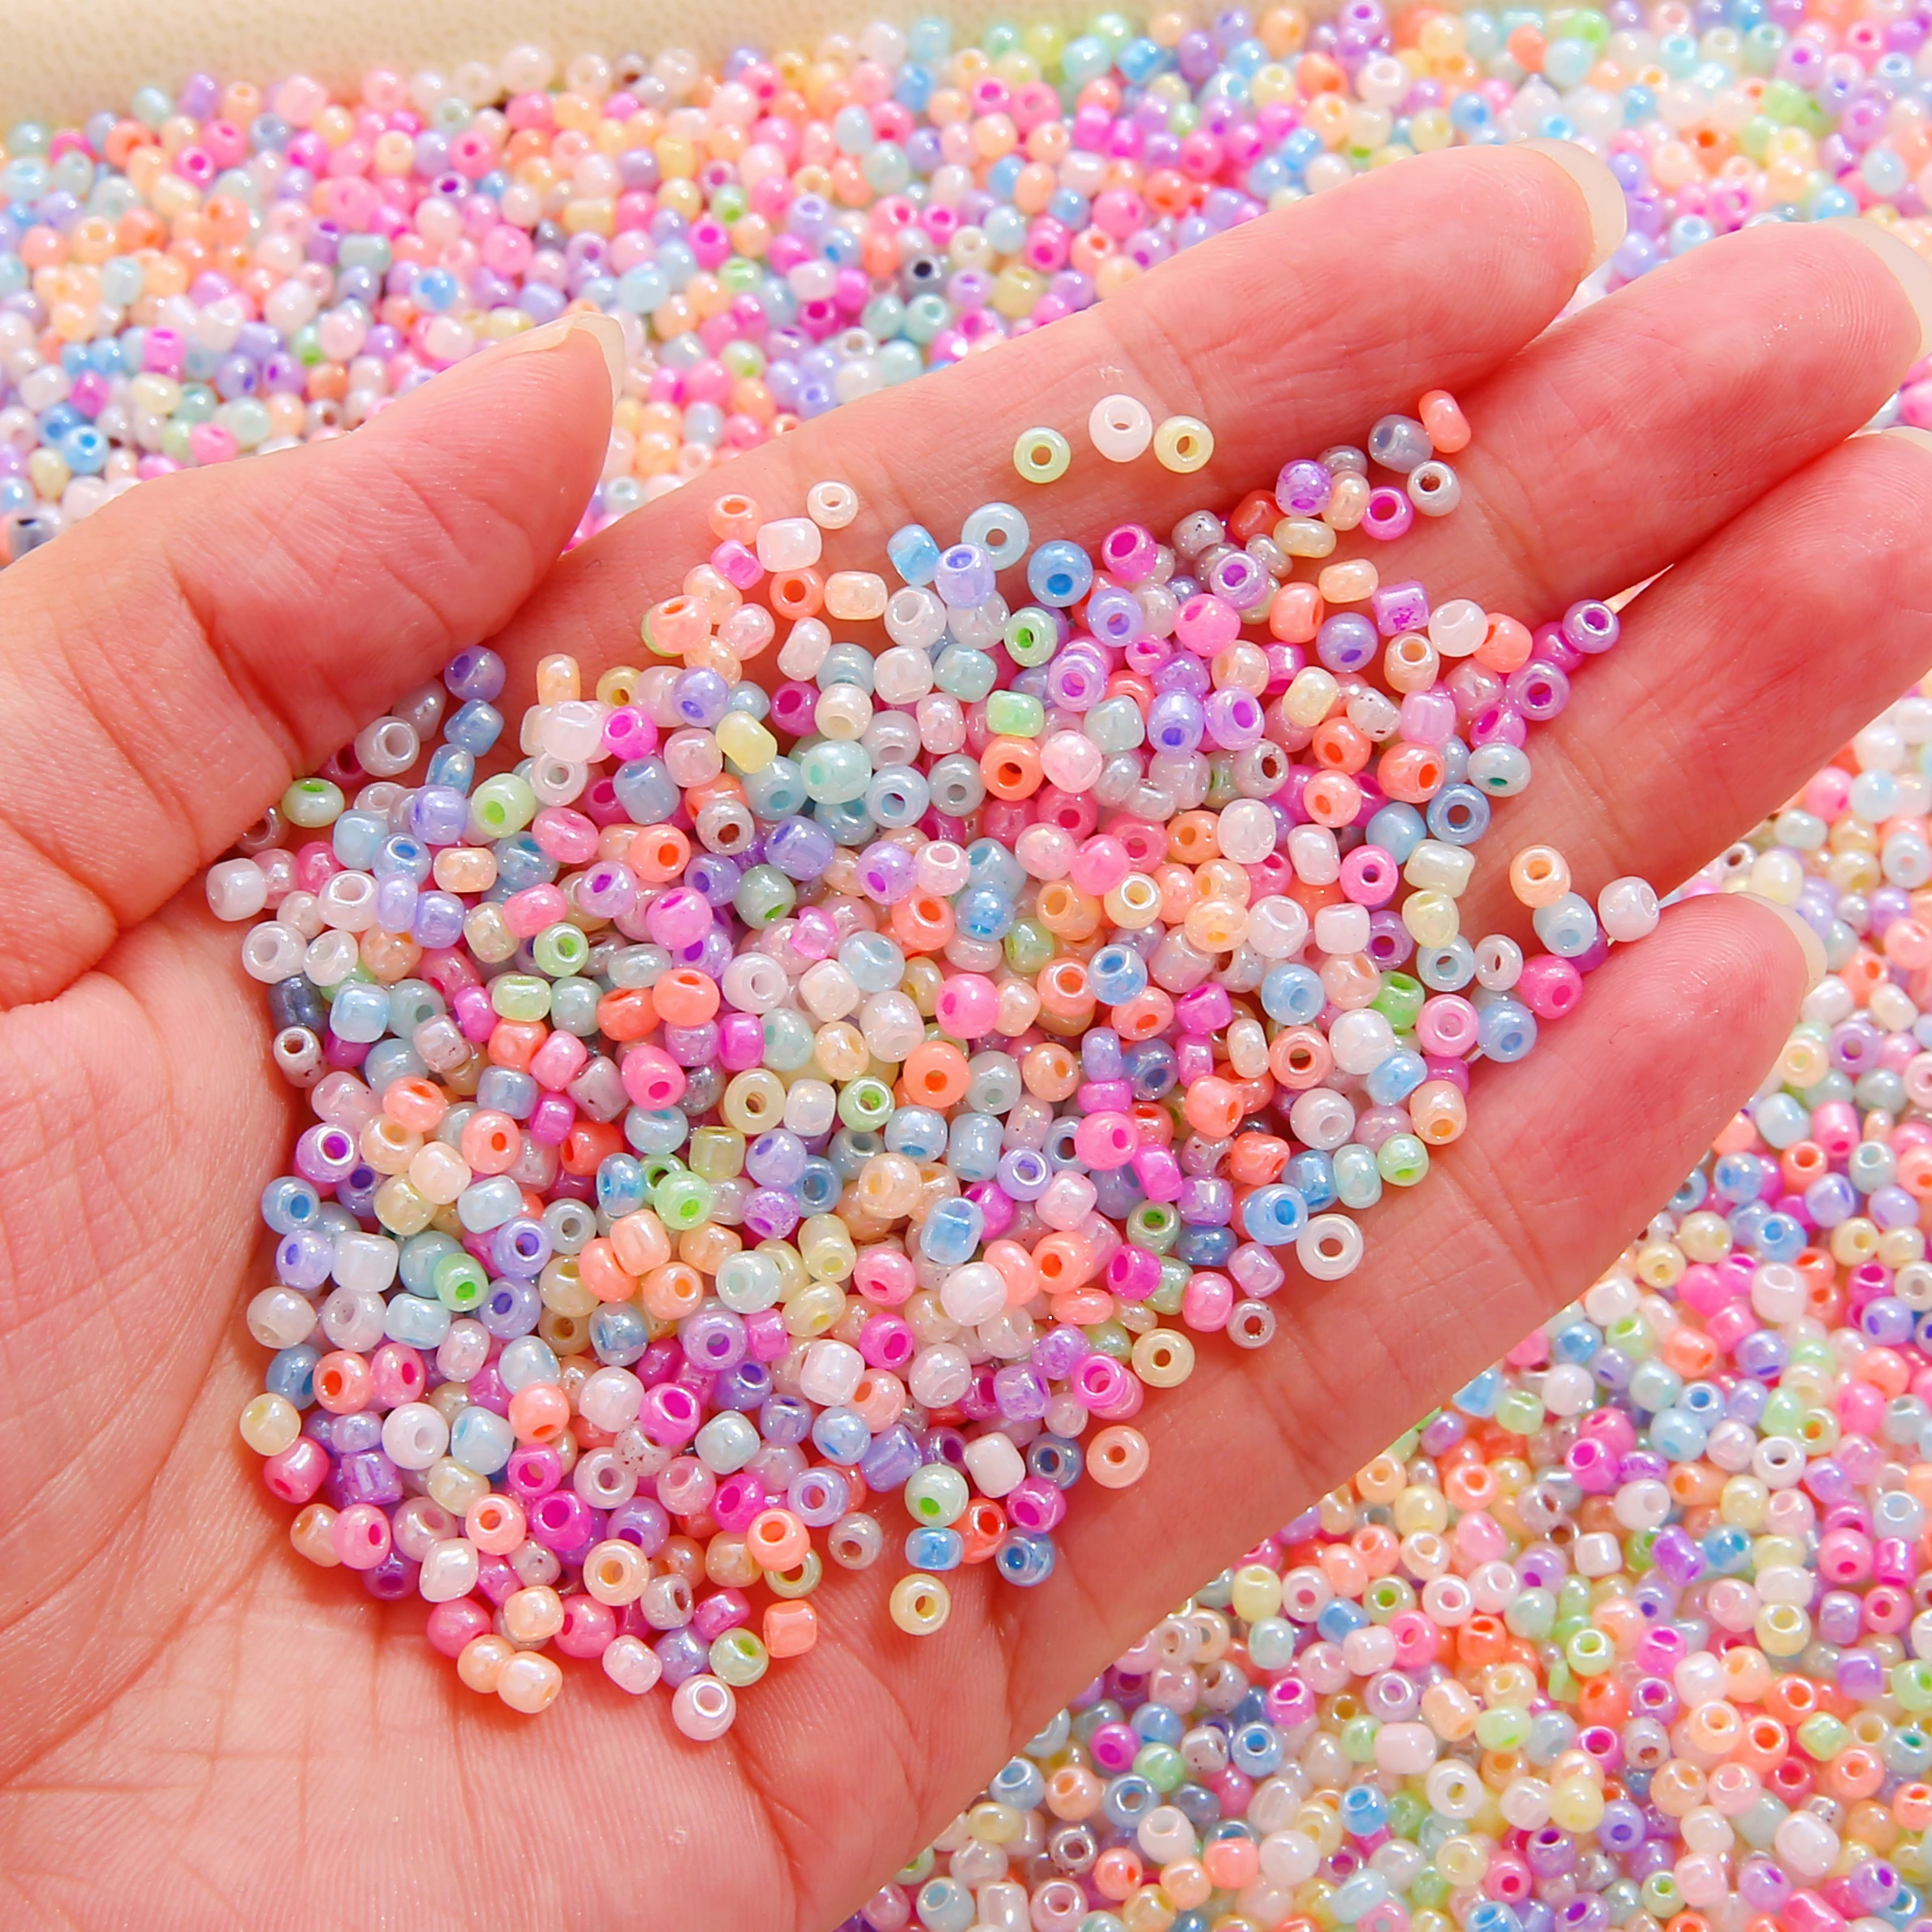 200-1000pcs 2/3/4mm Charm Czech Glass Seed Beads Round Spacer